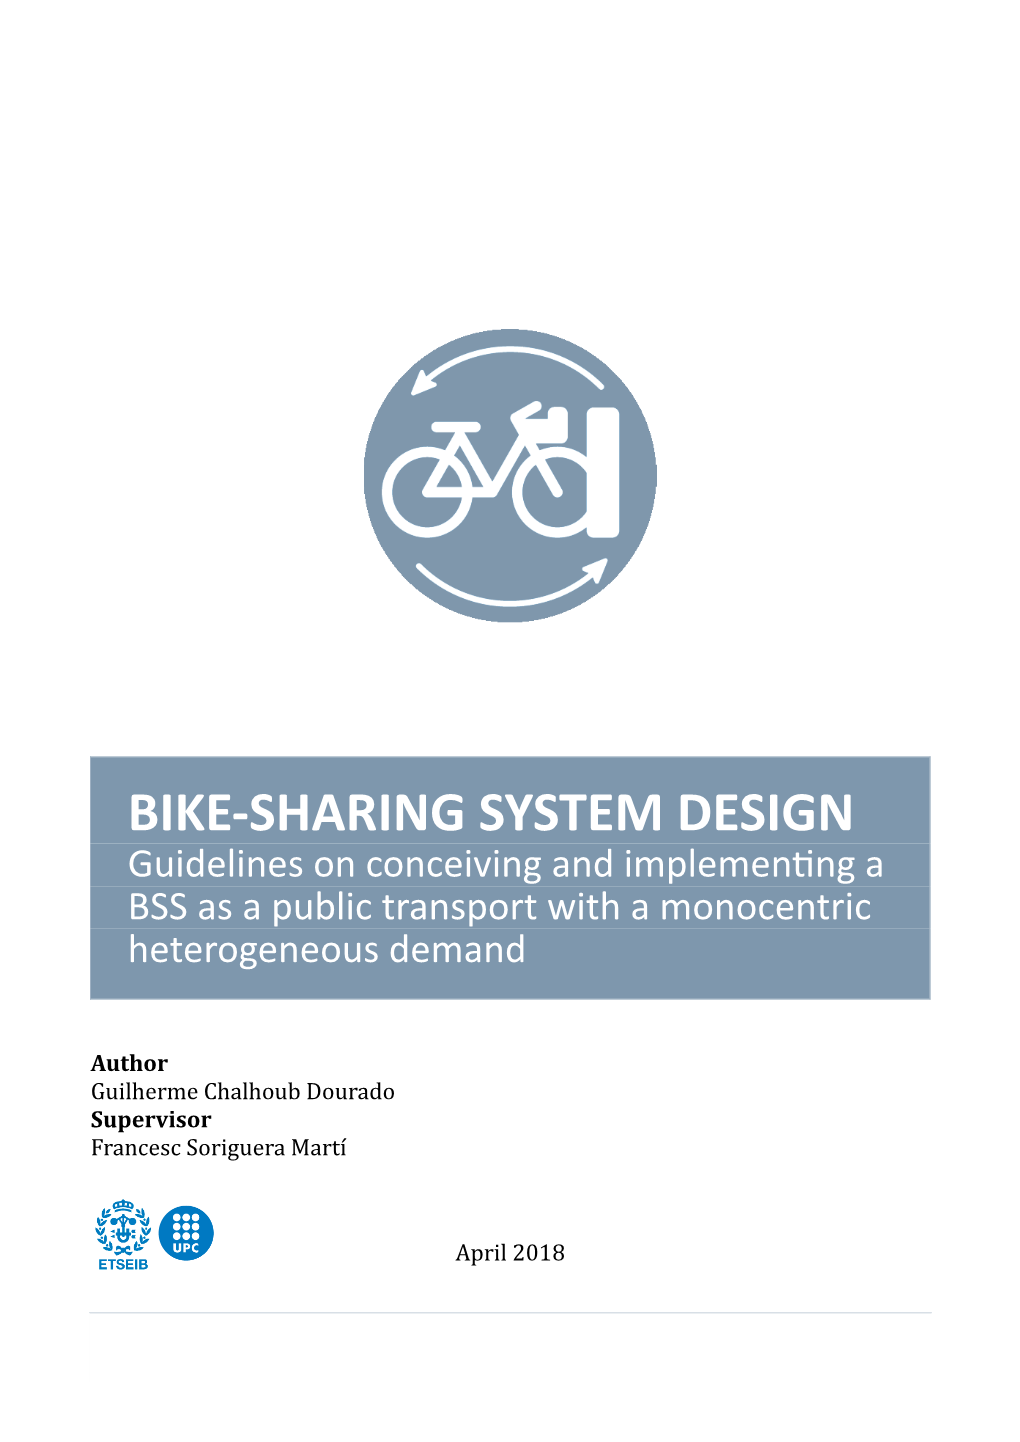 BIKE-SHARING SYSTEM DESIGN Guidelines on Conceiving and Implementing a BSS As a Public Transport with a Monocentric Heterogeneous Demand